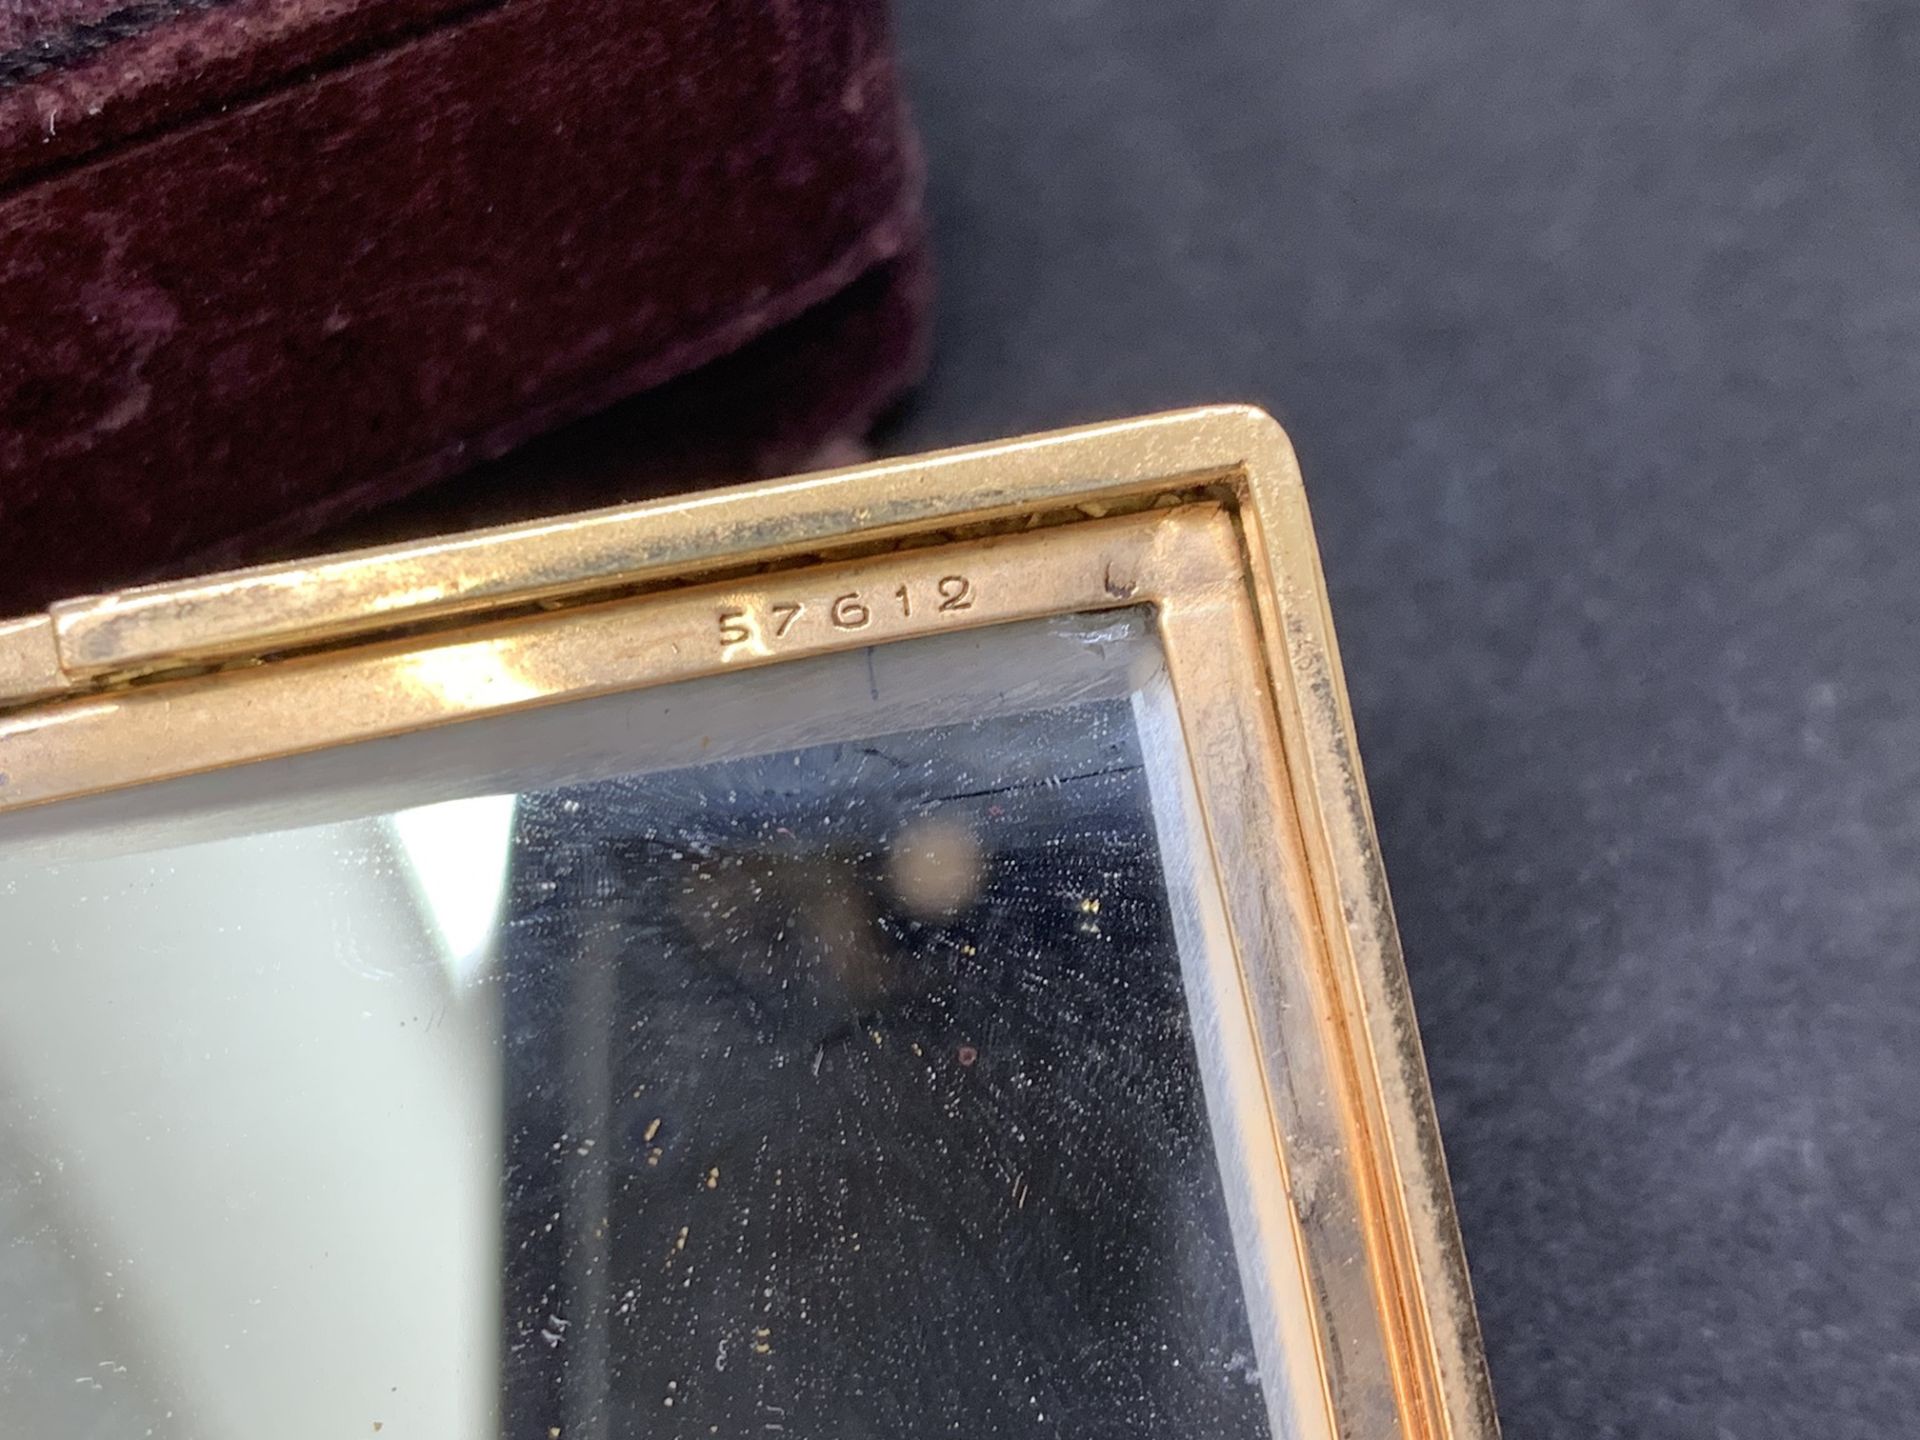 VAN CLEEF & ARPELS GOLD COMPACT SIGNED - 121 GRAMS - Image 11 of 11